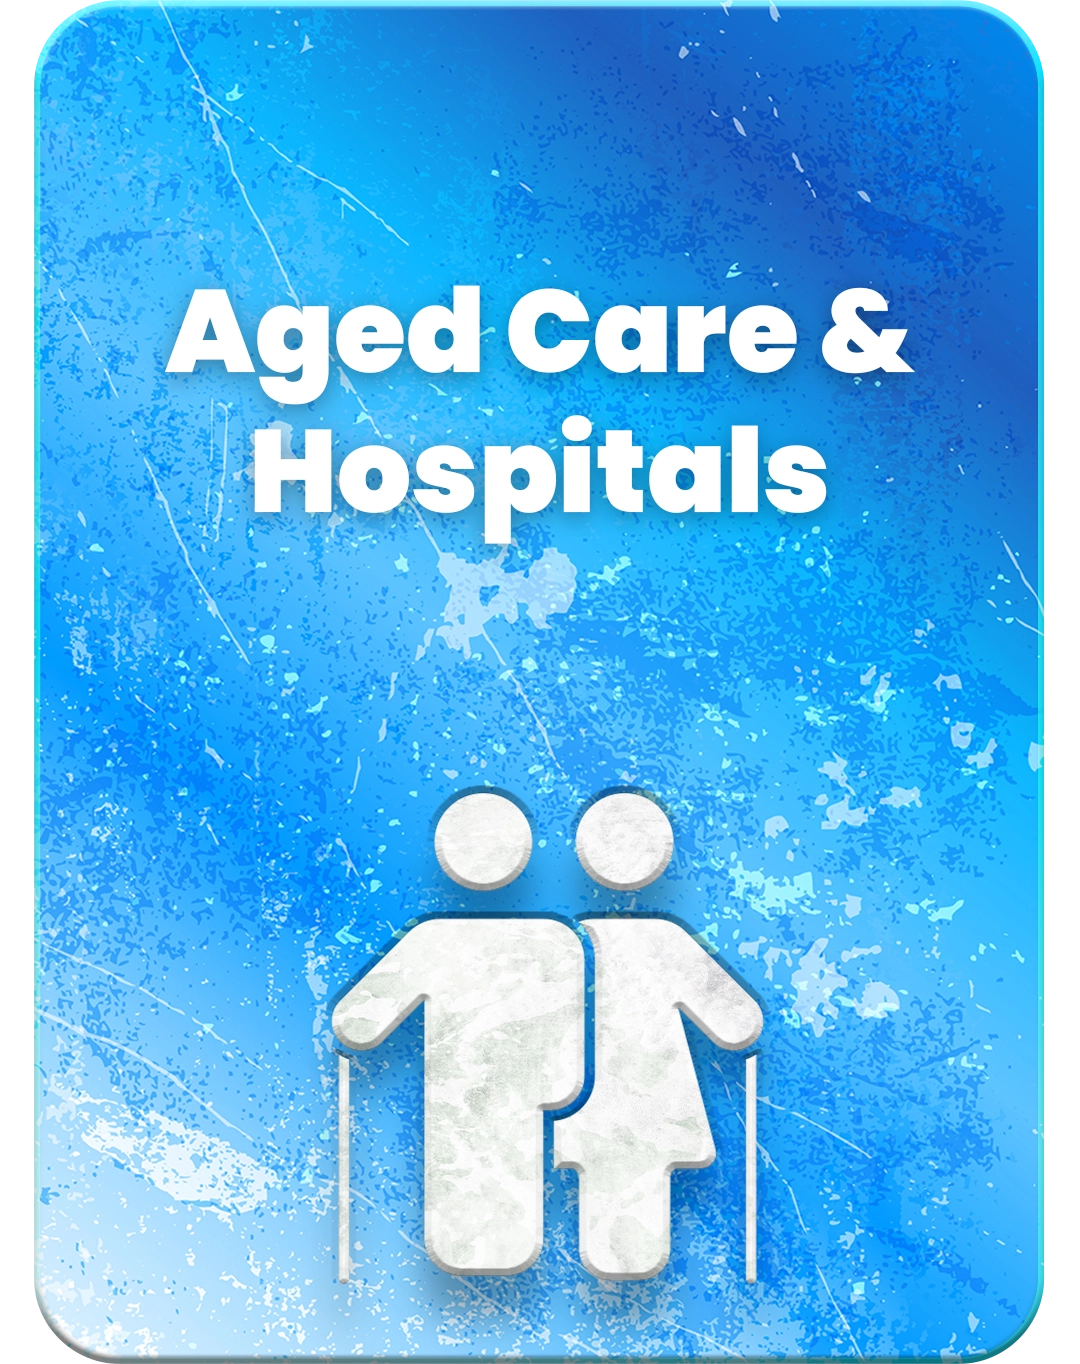 Aged Care & Hospitals